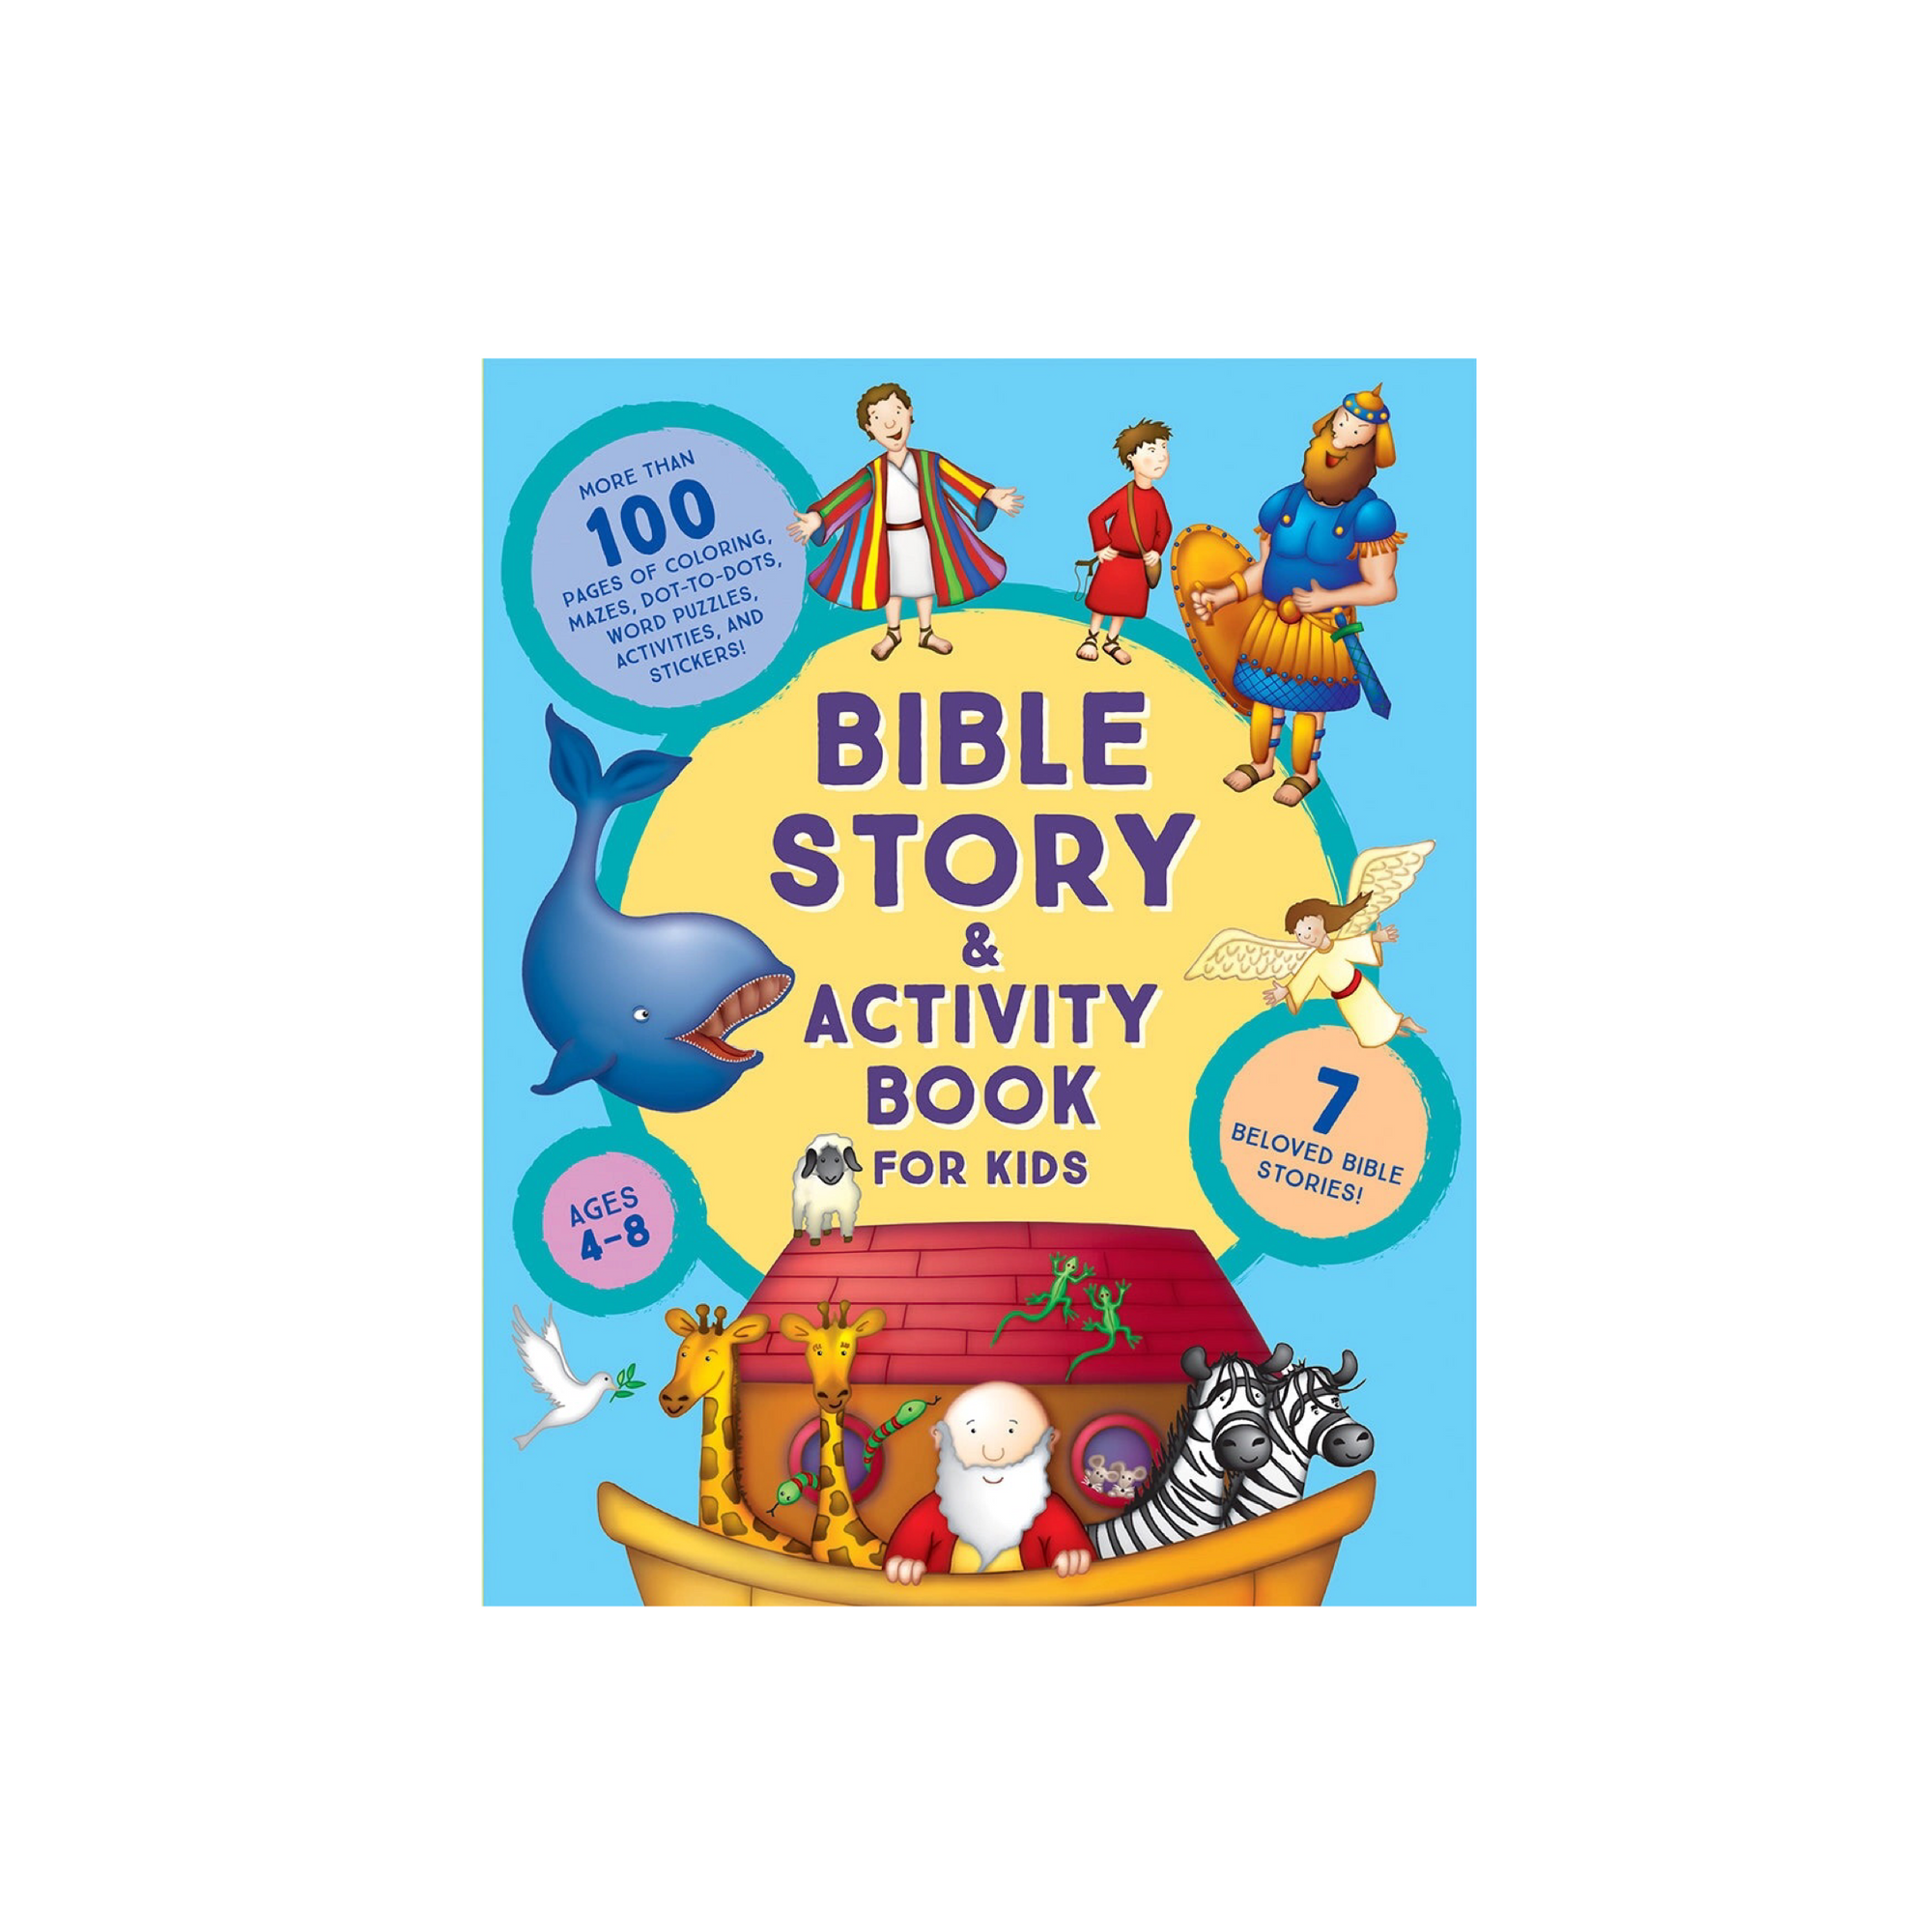 Bible Story and Activity Book For Kids